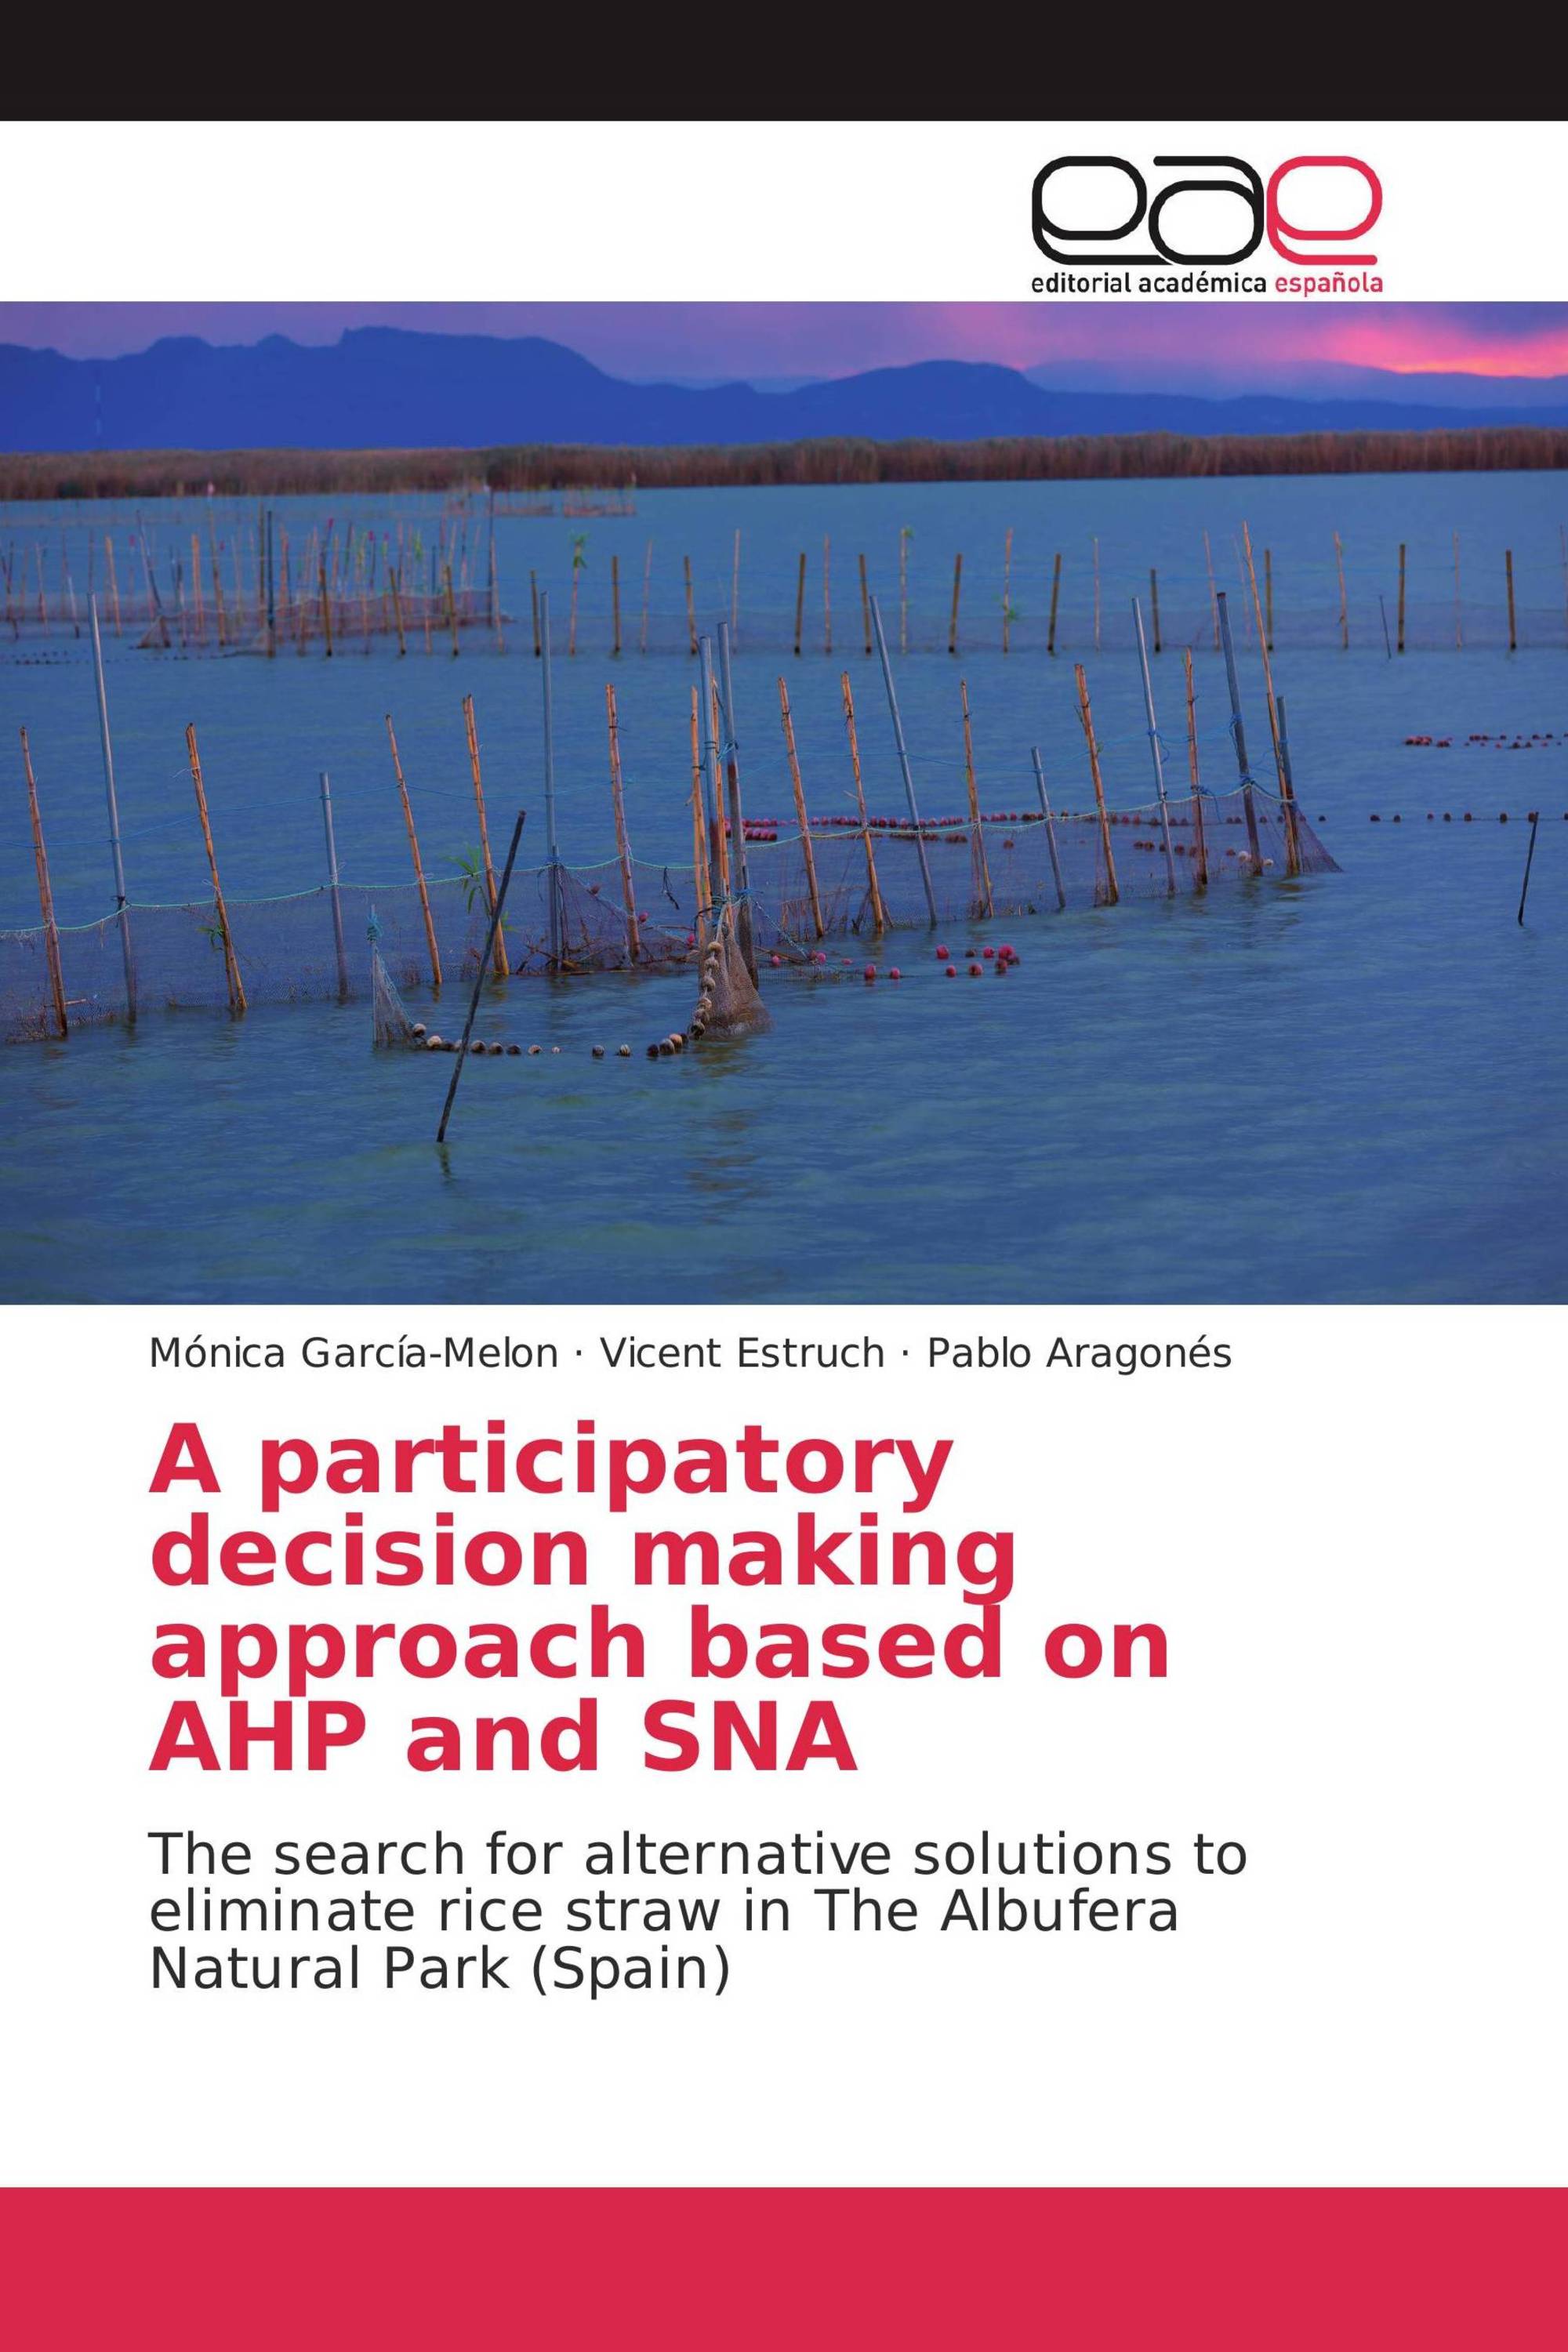 A participatory decision making approach based on AHP and SNA